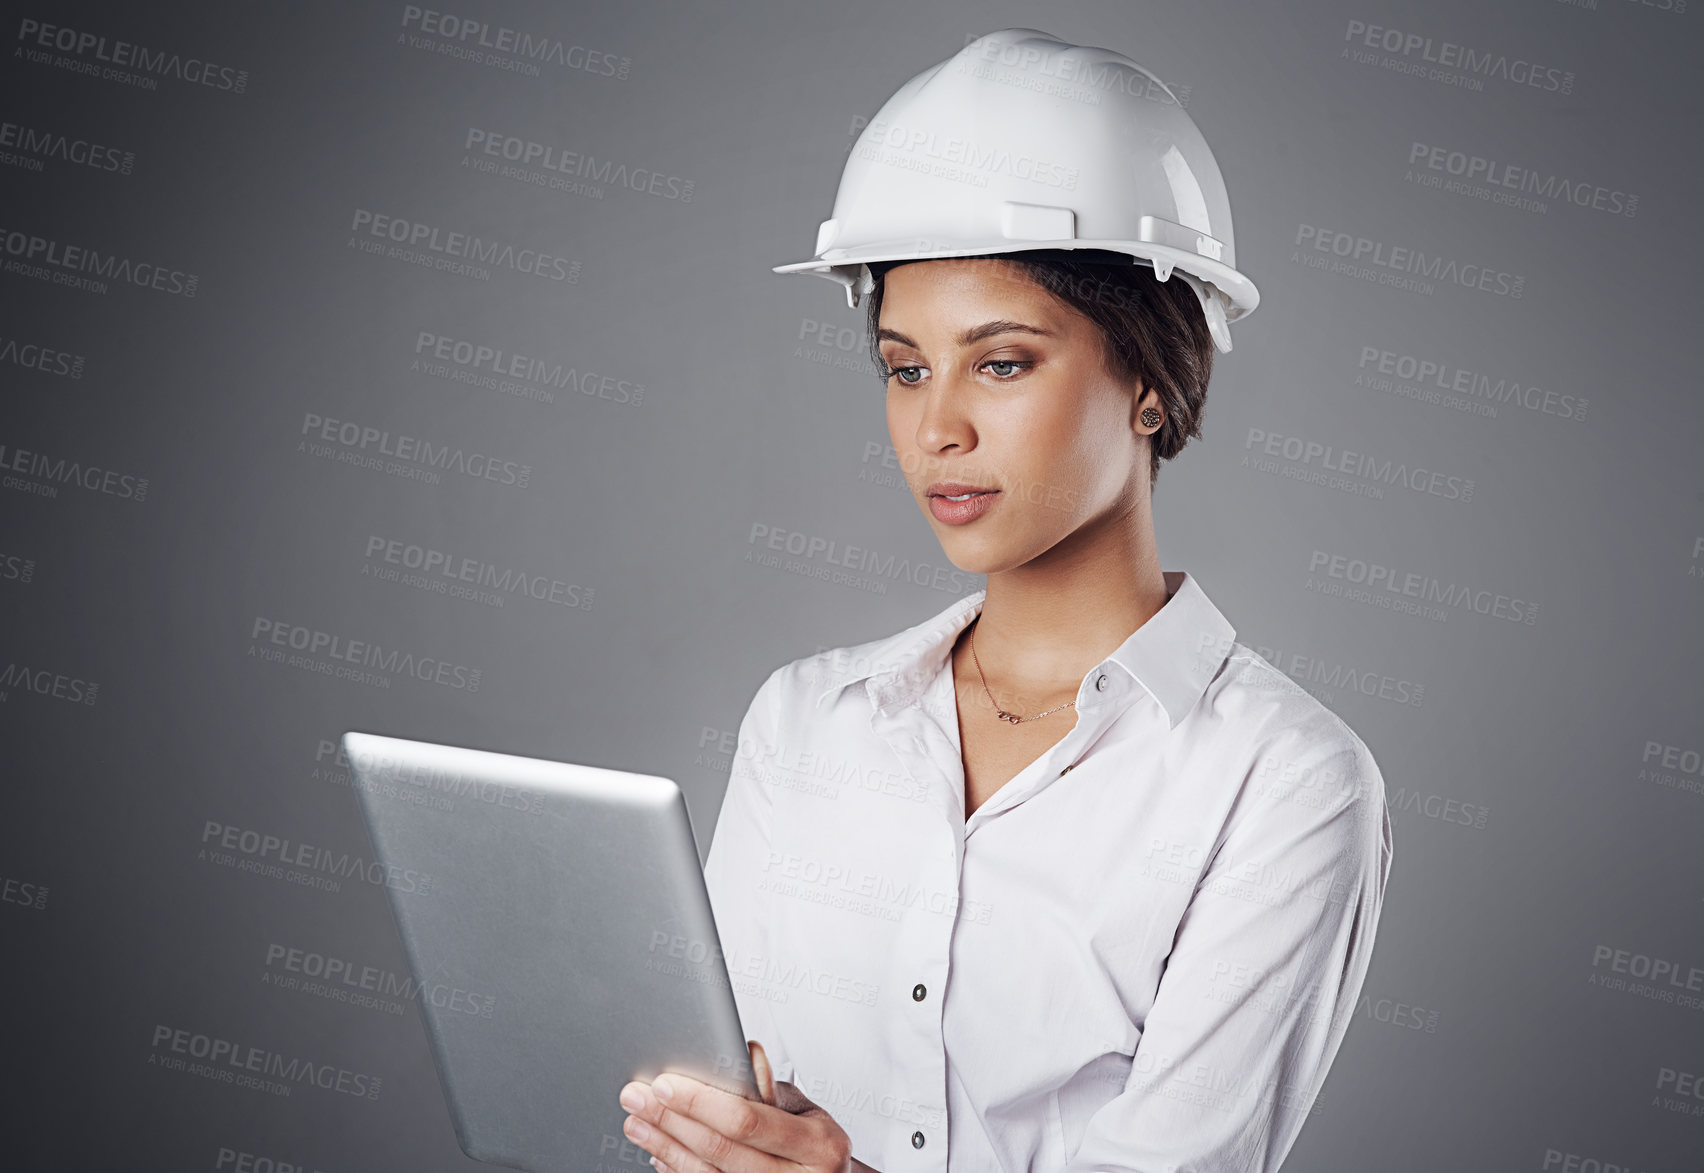 Buy stock photo Shot of a well-dressed civil engineer using her tablet while standing in the studio